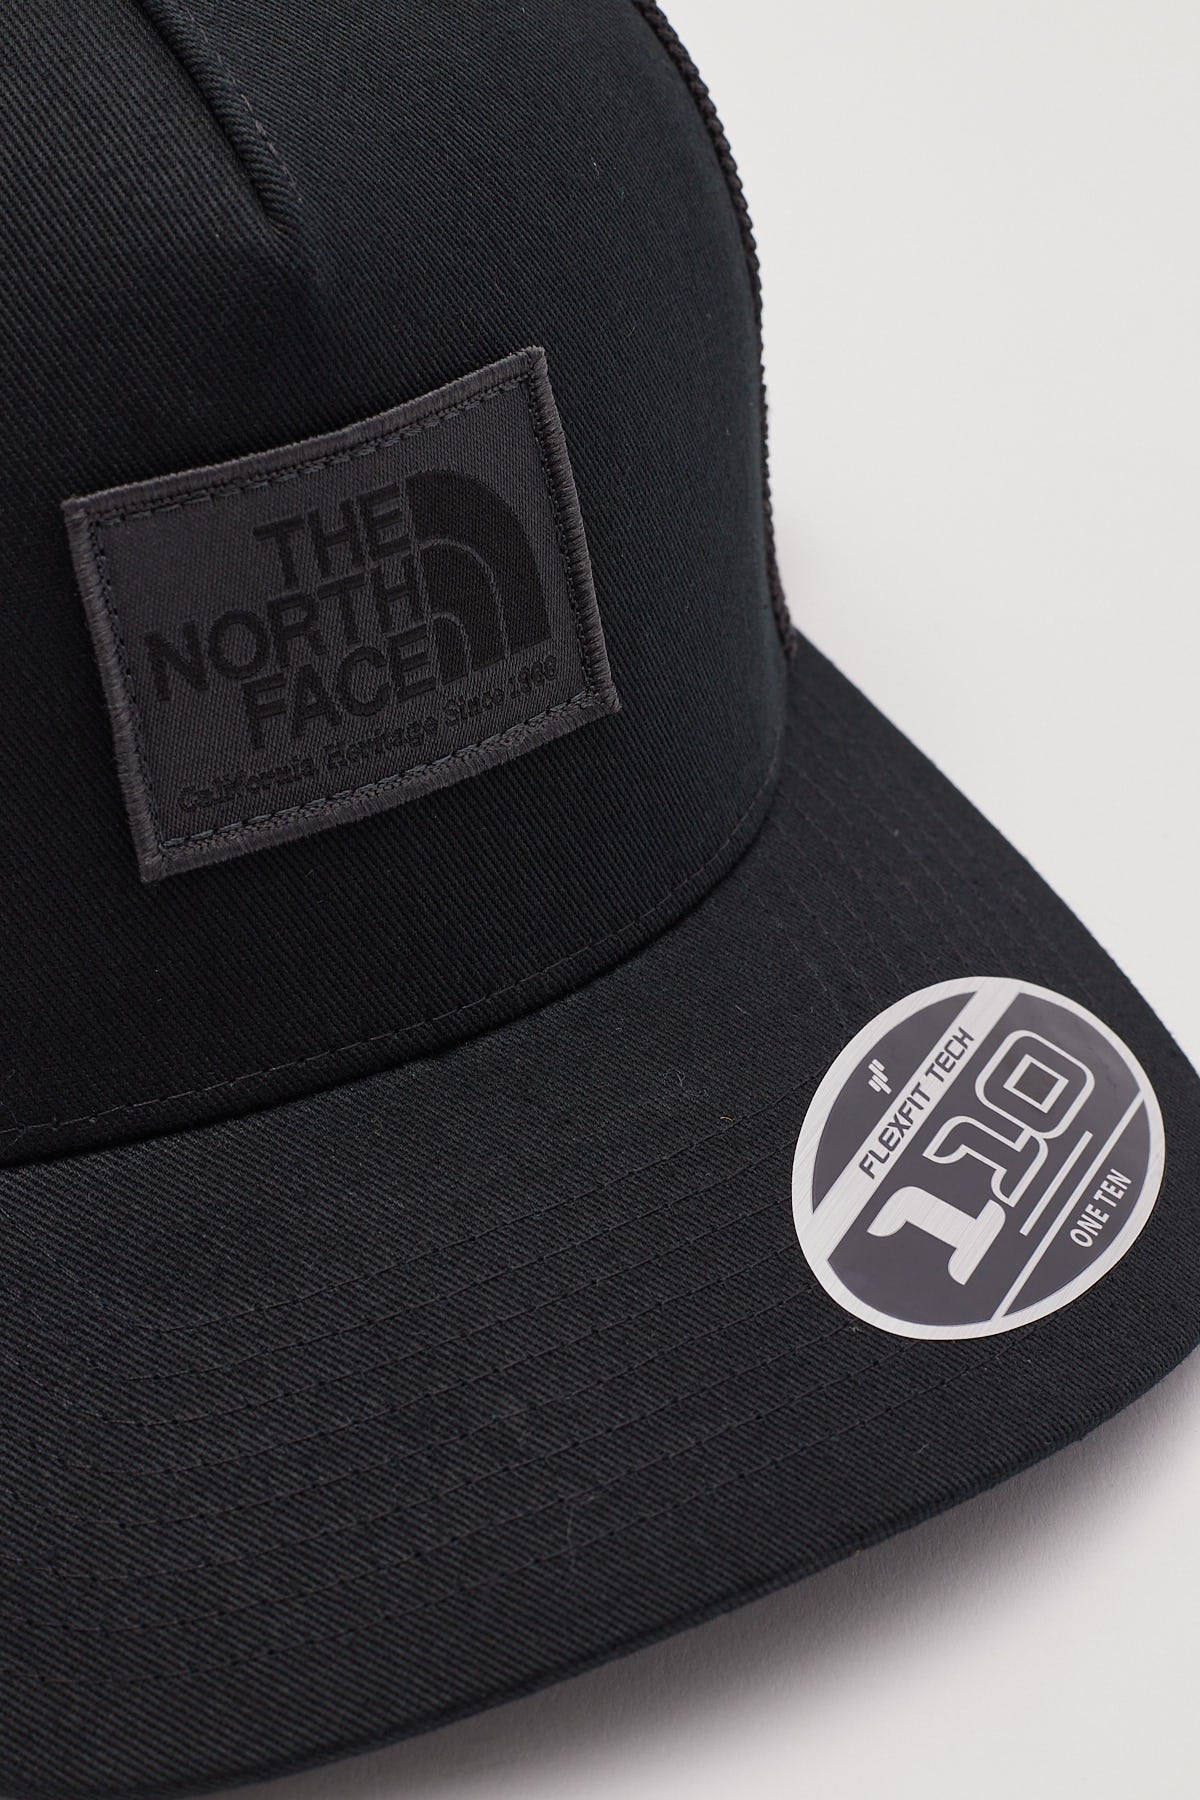 The North Face Keep It Patched Structured Trucker Black